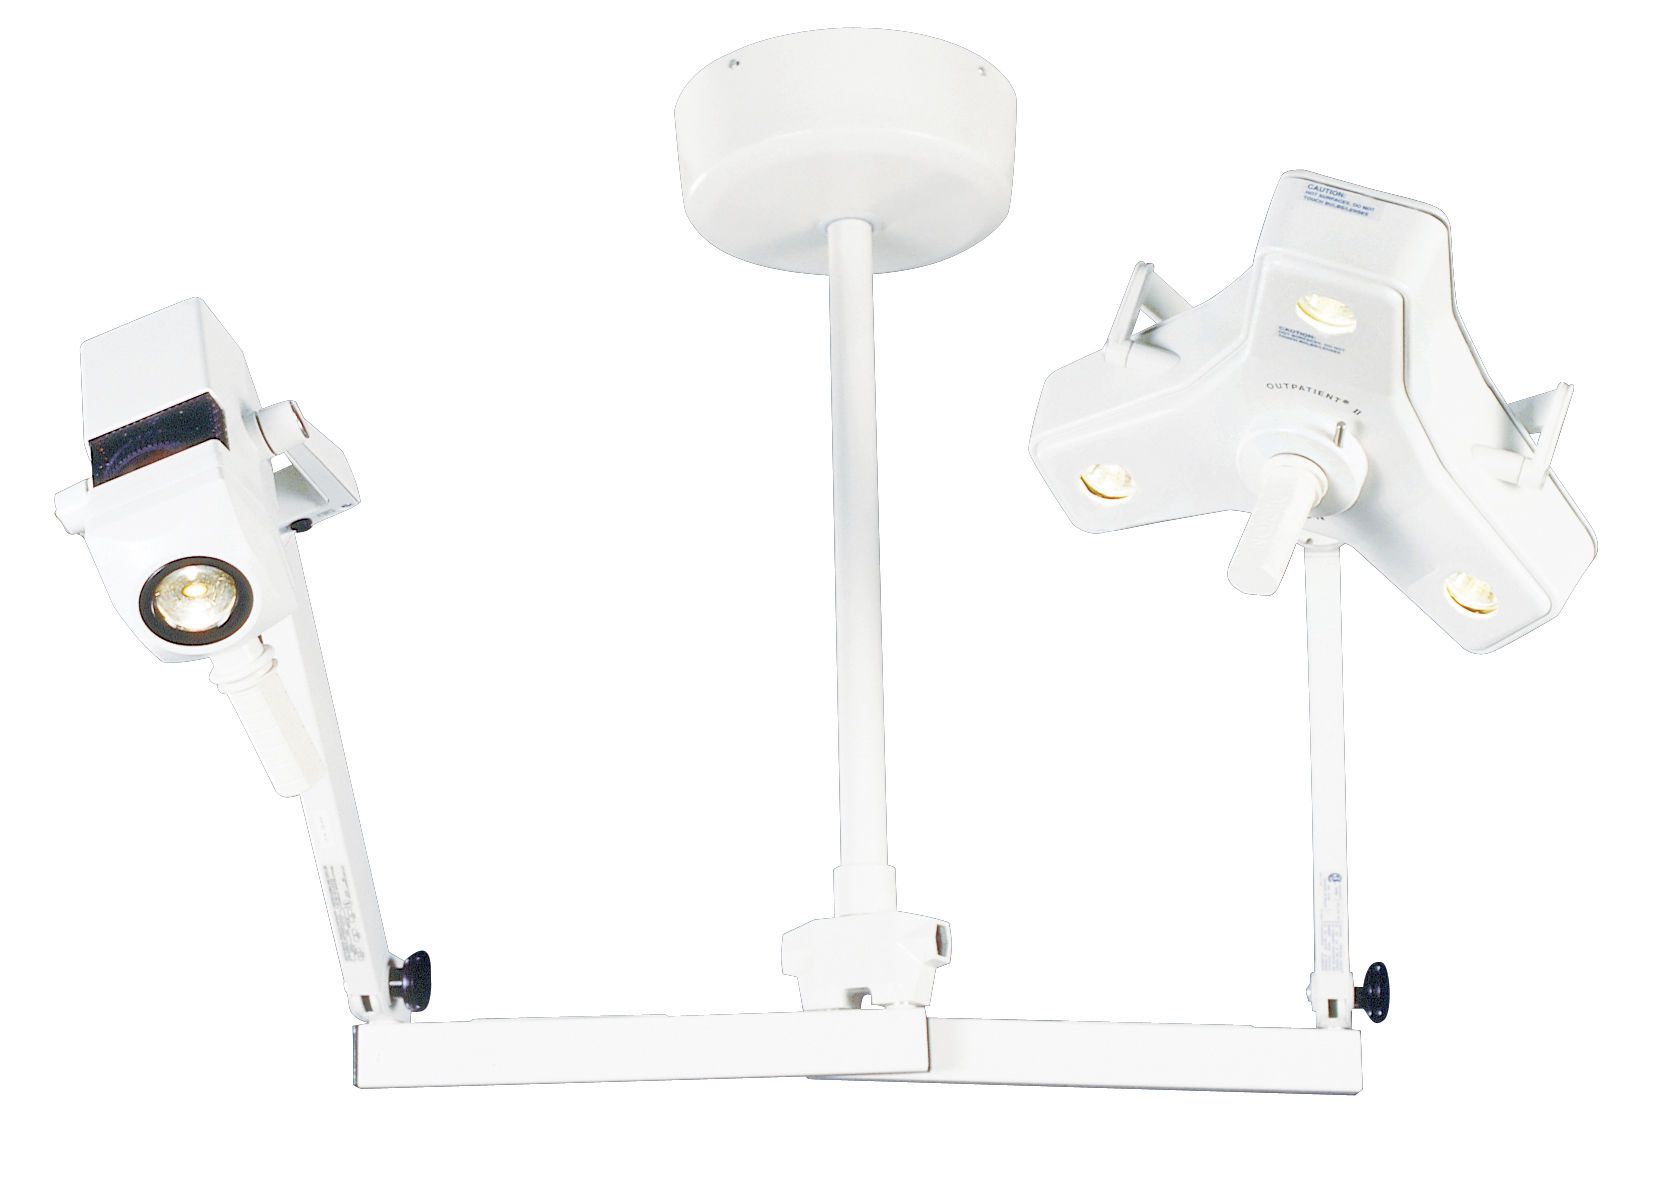 Minor surgery examination lamp / halogen / ceiling-mounted Outpatient II / CoolSpot II Burton Medical